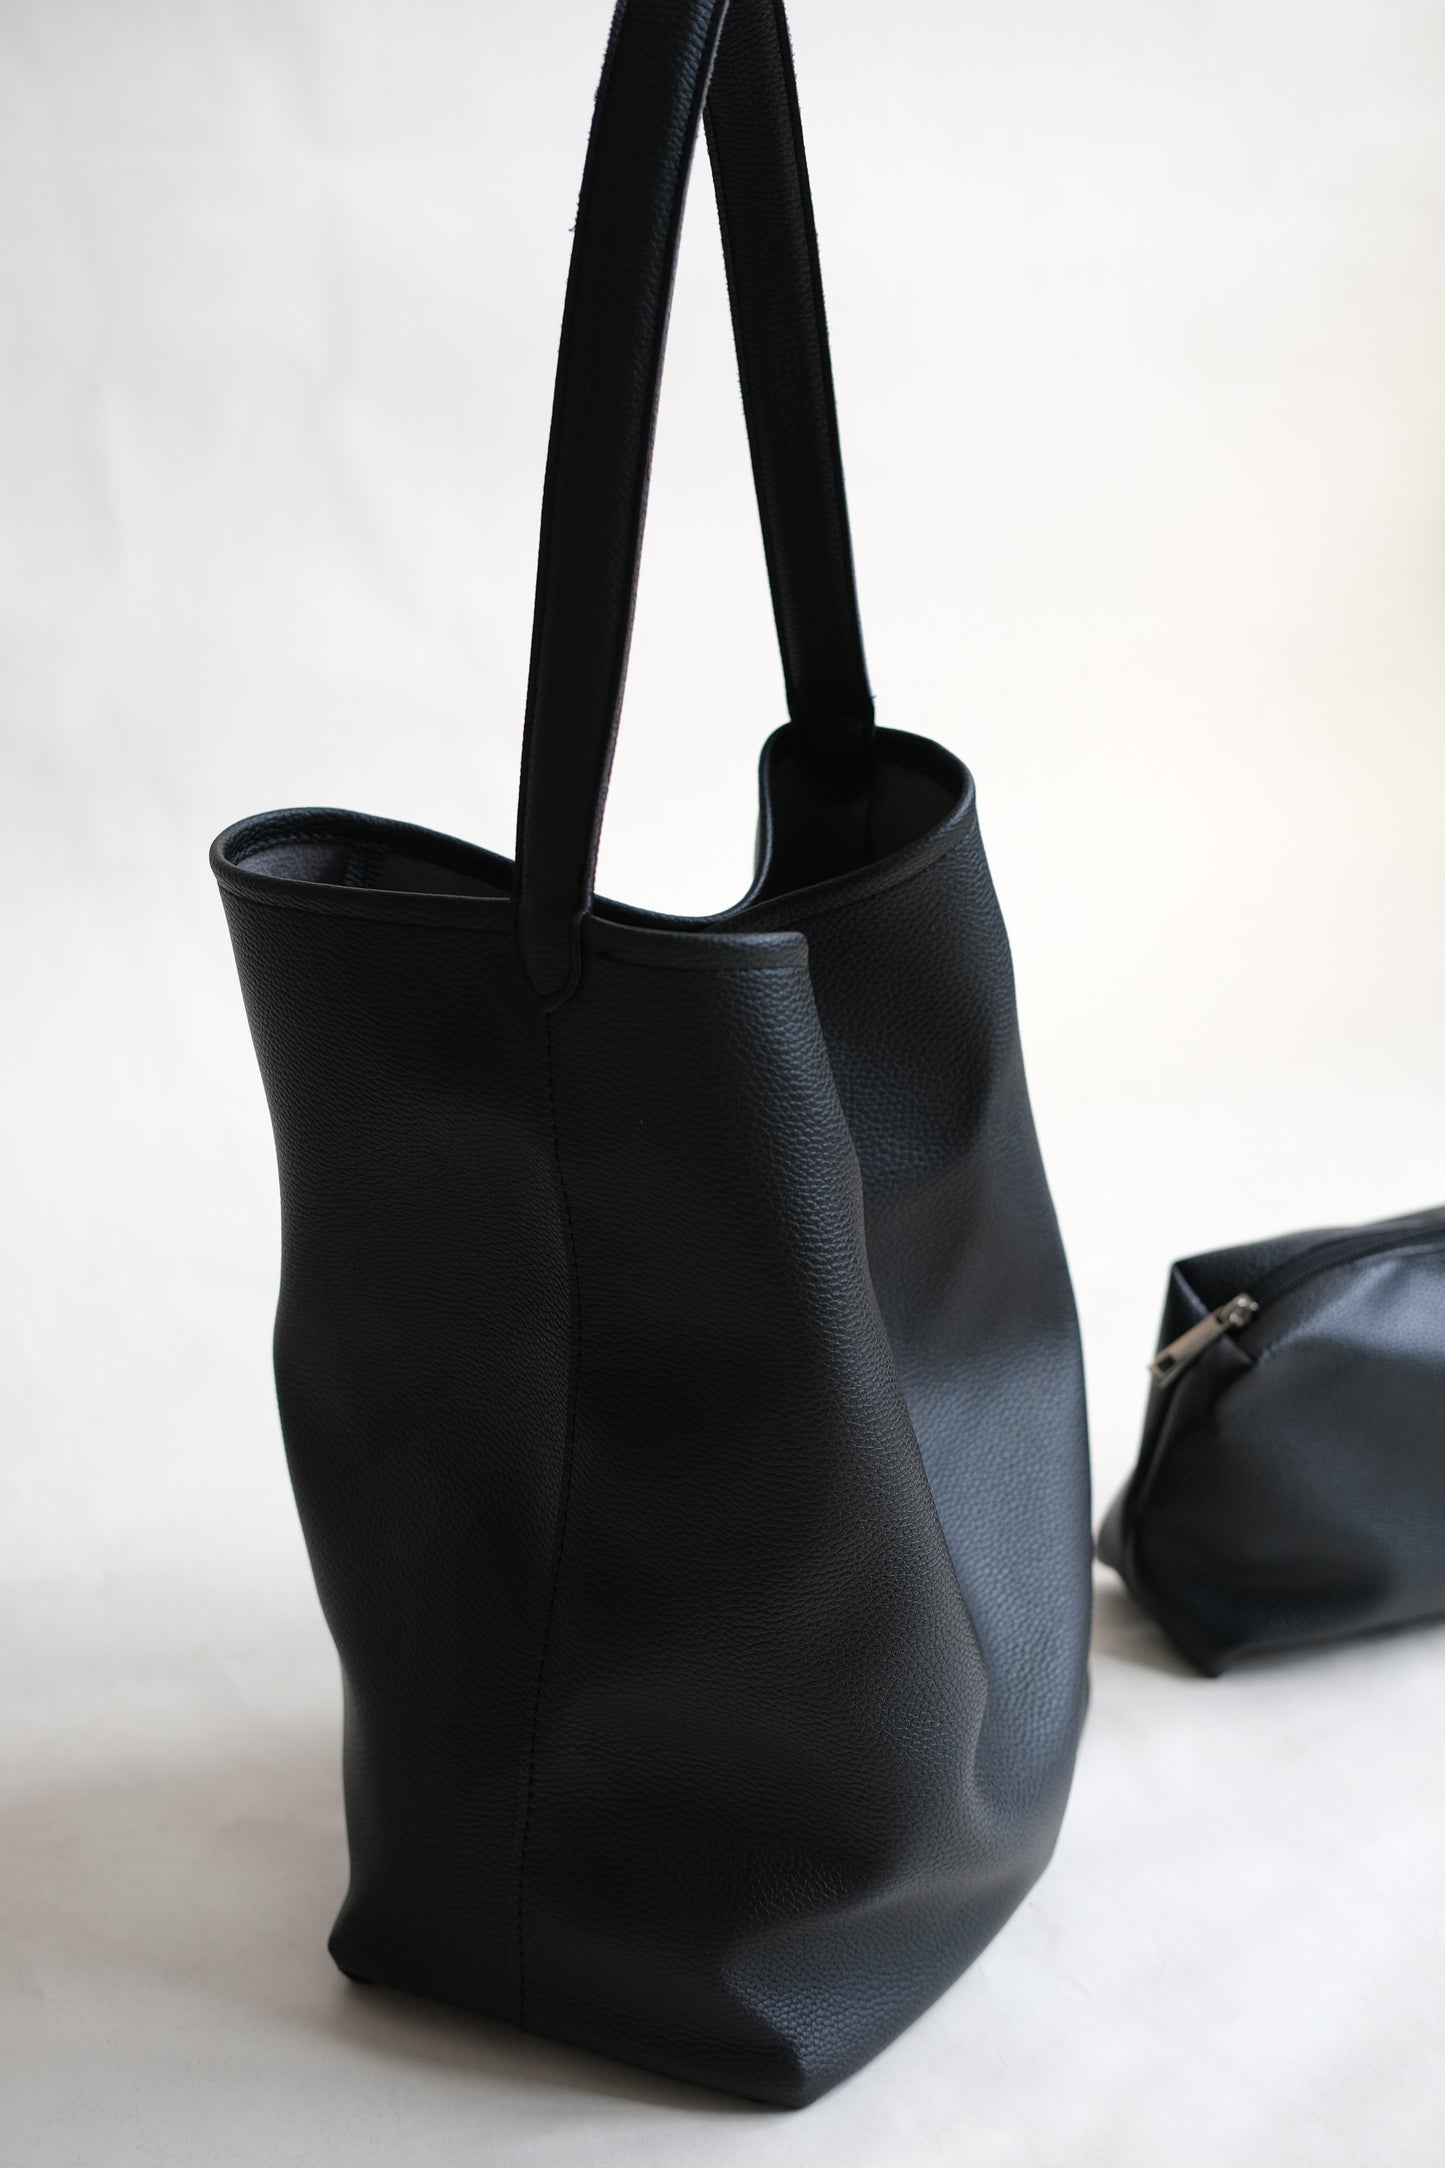 PU soft leather pebbled bucket bag in classic black